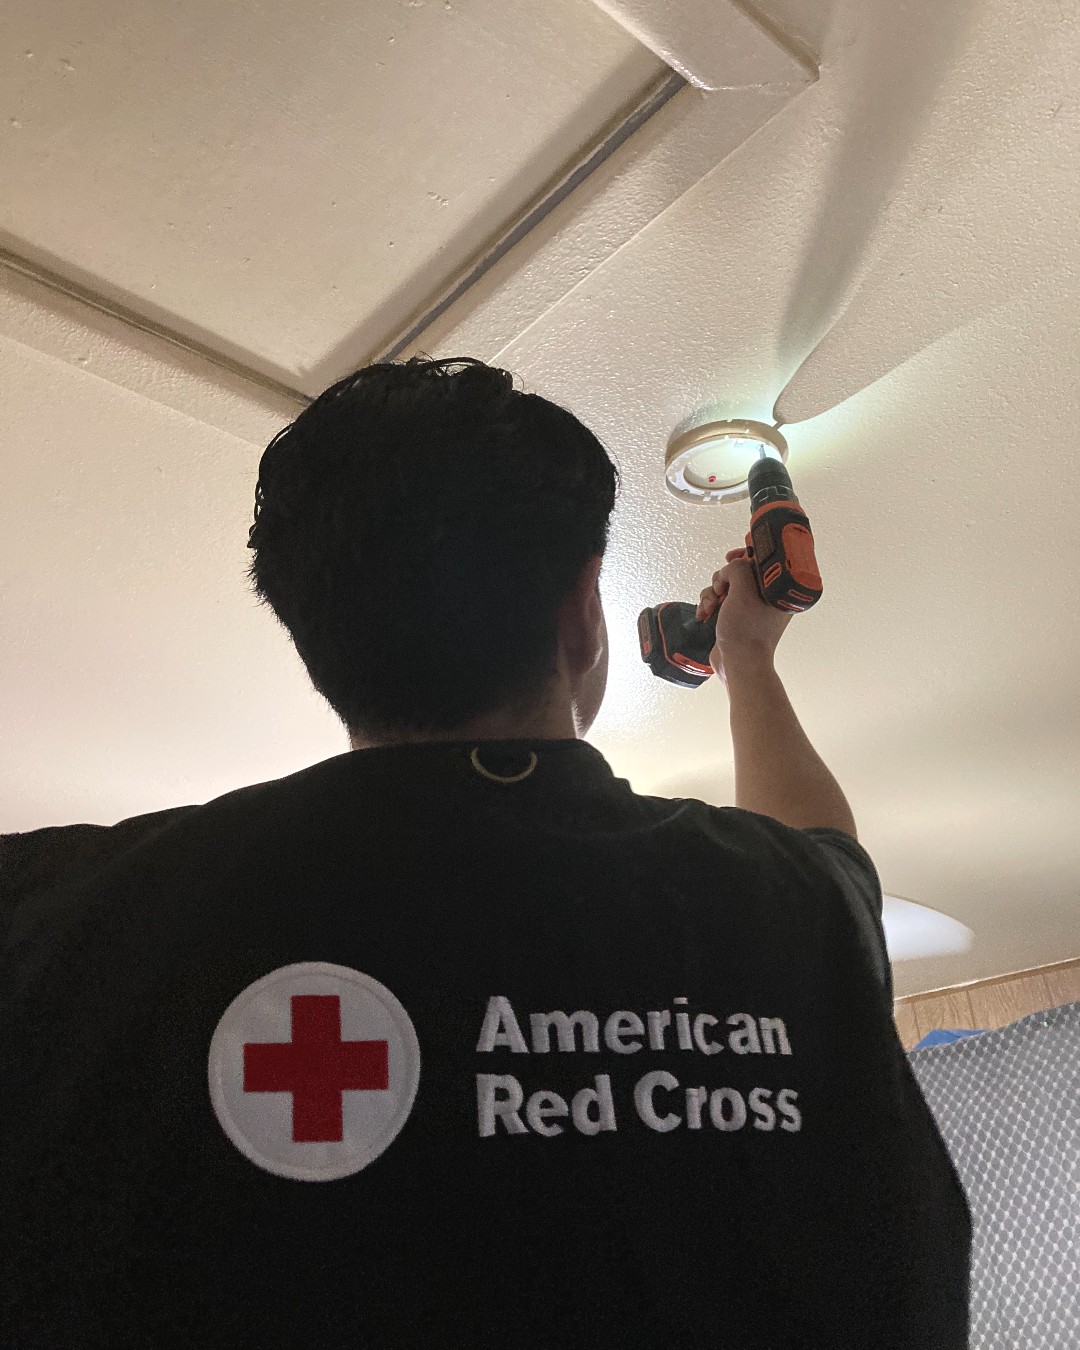 During the 2023 heat wave, the Red Cross combined heat preparedness education with its smoke alarm installation program, doubling outreach efforts.